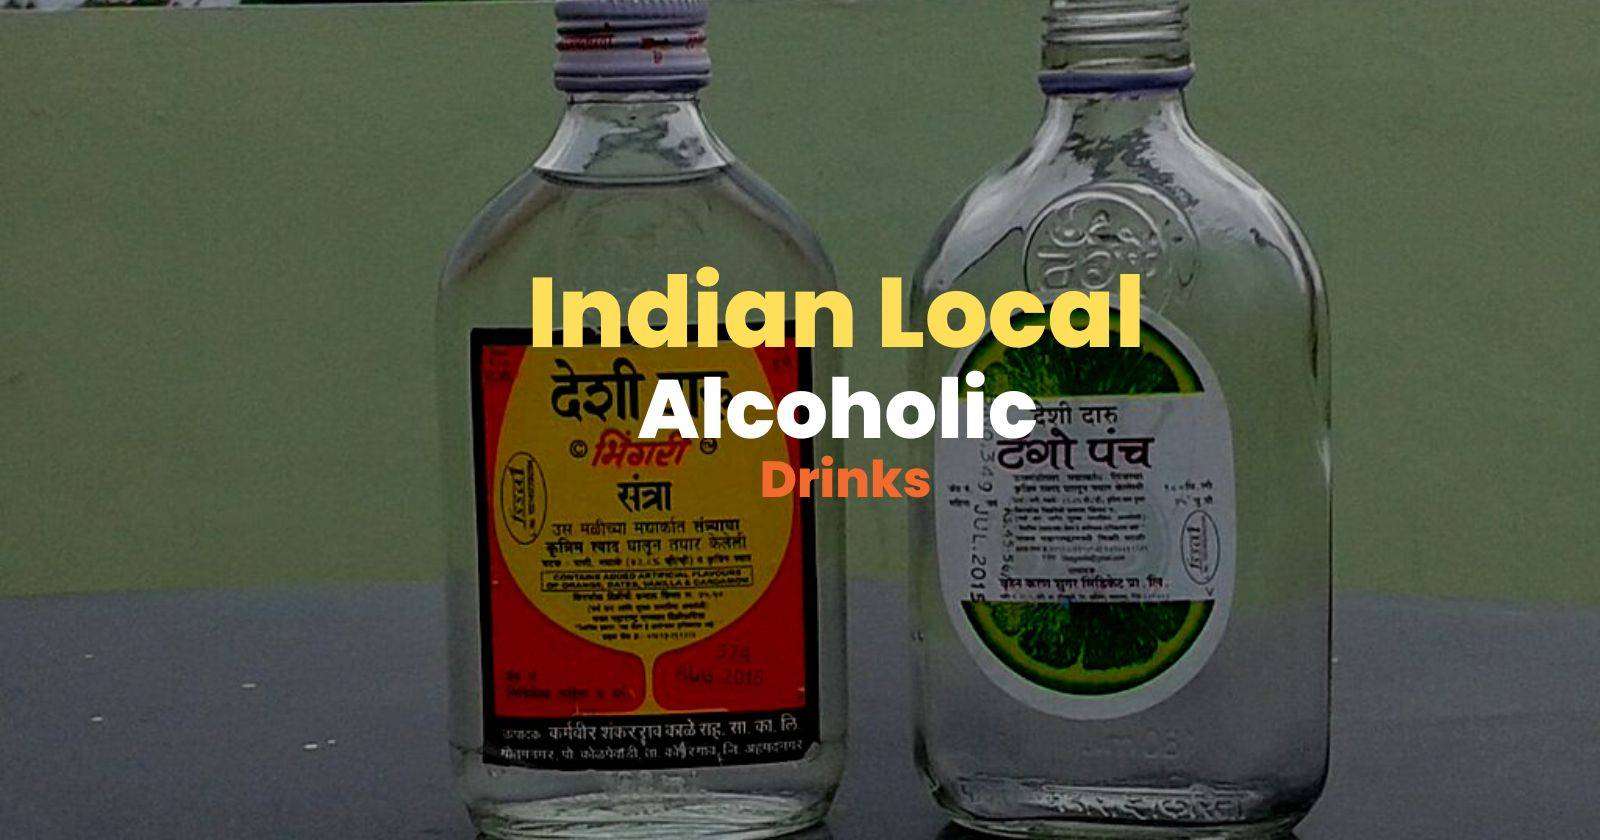 Indian Local Alcoholic Drink